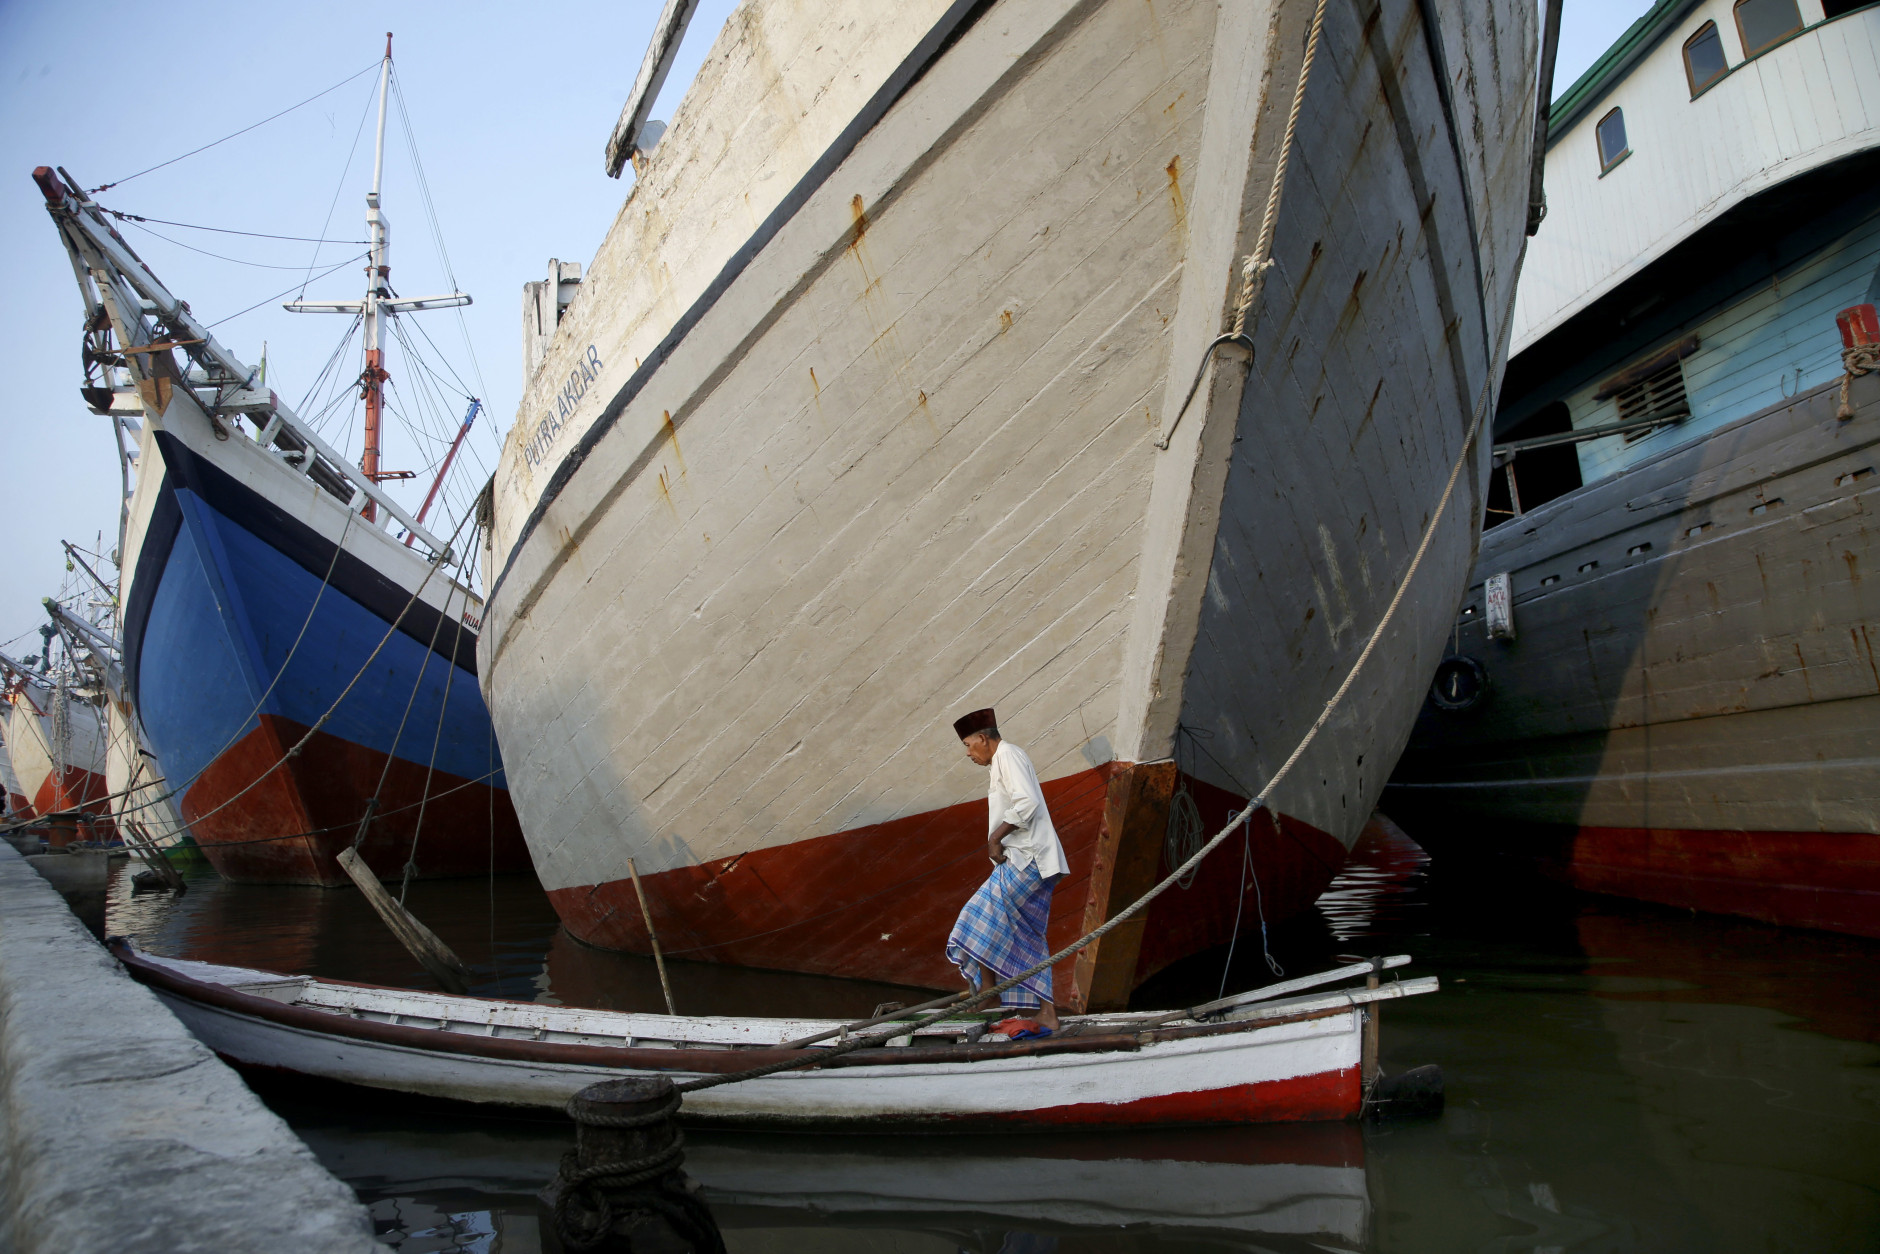 An Indonesian Muslim man arrive on a boat for an Eid al-Fitr prayer to mark the end of the holy fasting month of Ramadan at Sunda Kelapa port in Jakarta, Indonesia, Wednesday, July 6, 2016. (AP Photo/Tatan Syuflana)